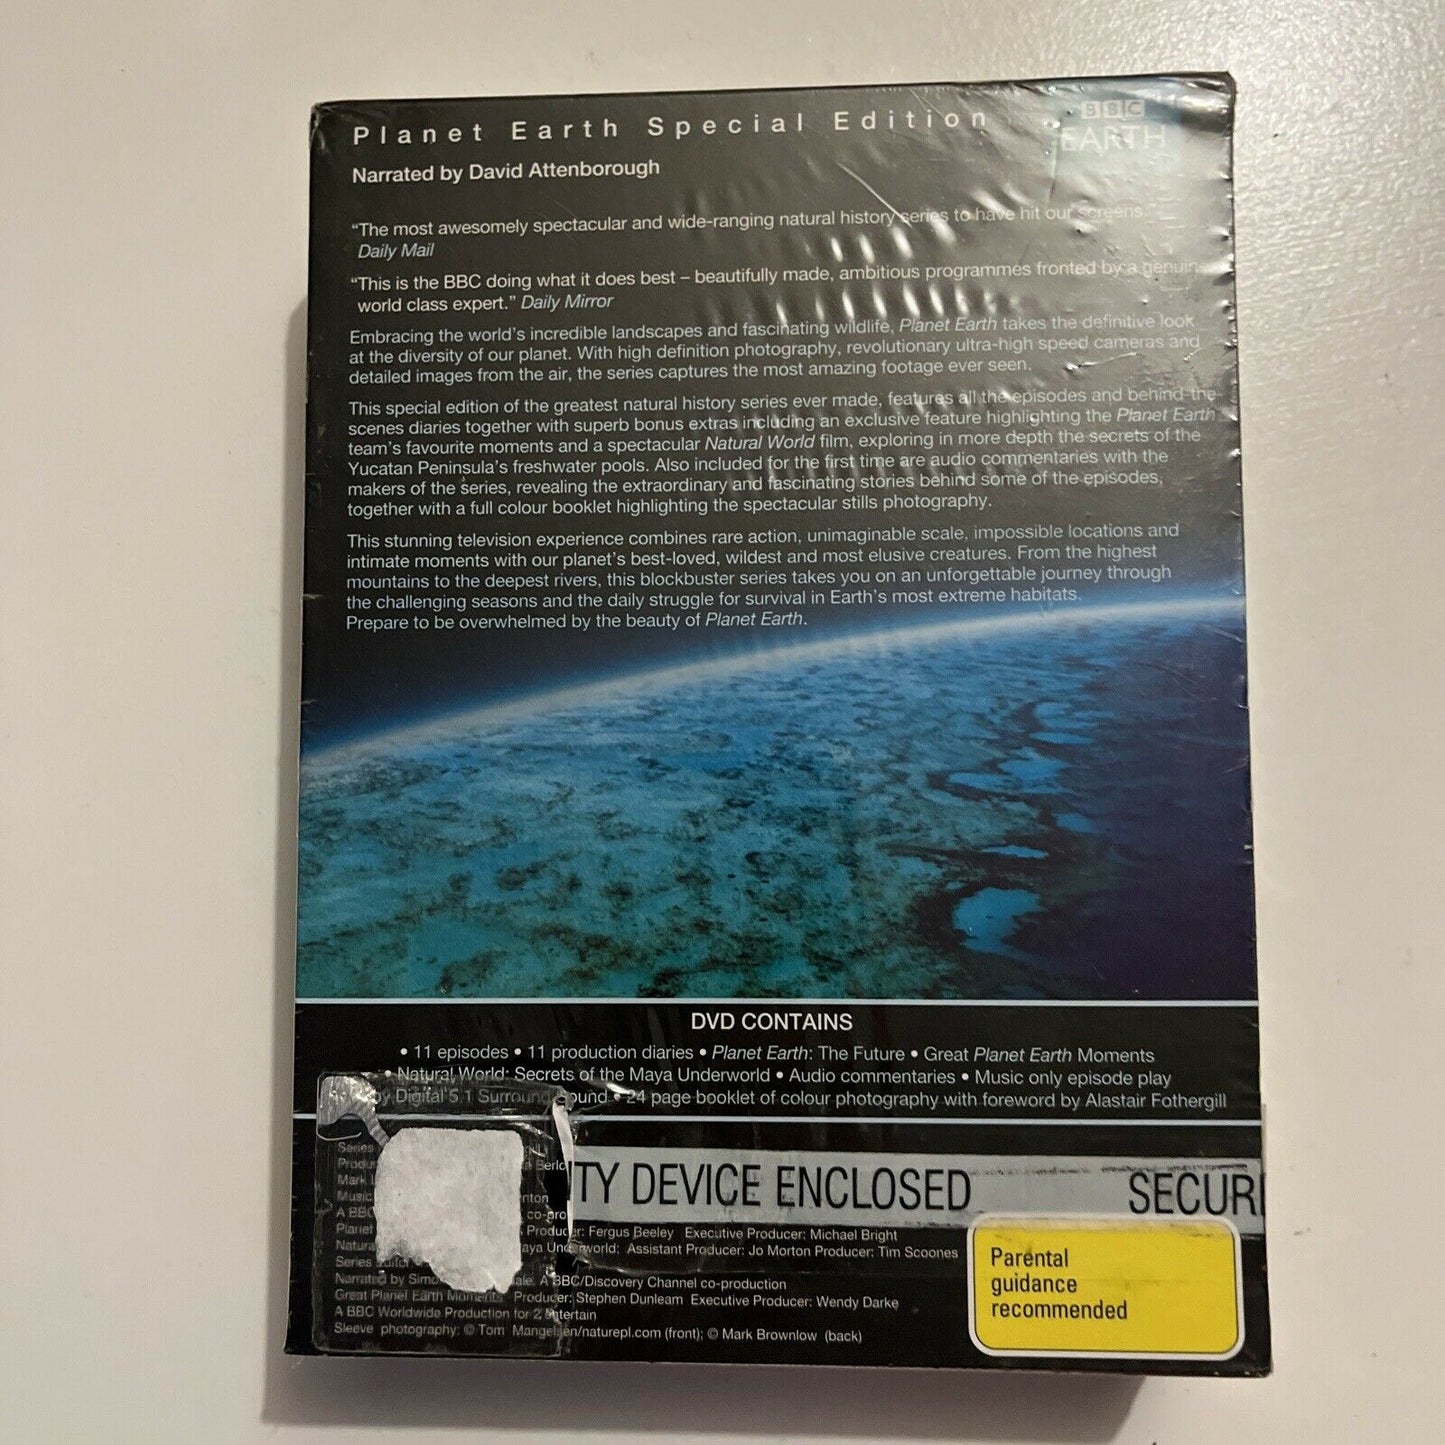 *New Sealed* BBC Planet Earth - The Complete Series (DVD, 2010, 6-Disc) Region 4